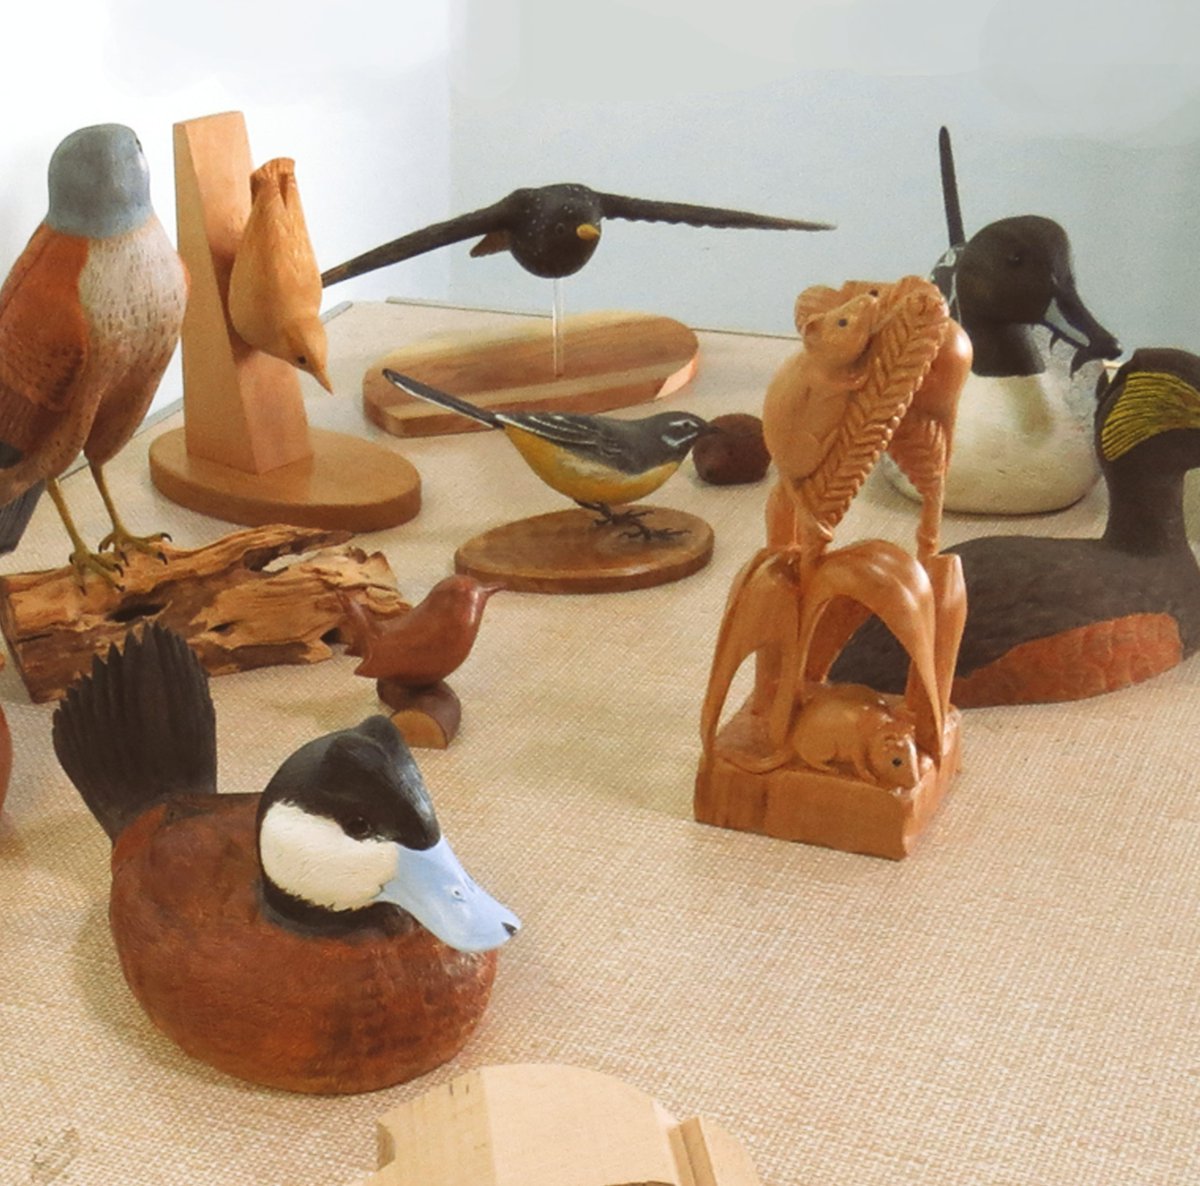 Meet the members of the Bentley Wildlife Wood Carvers today and see their hand-made models of wildlife in wood in our Swan Lake room from 10am-3pm. The carvers display their beautiful work and demonstrate carving techniques.